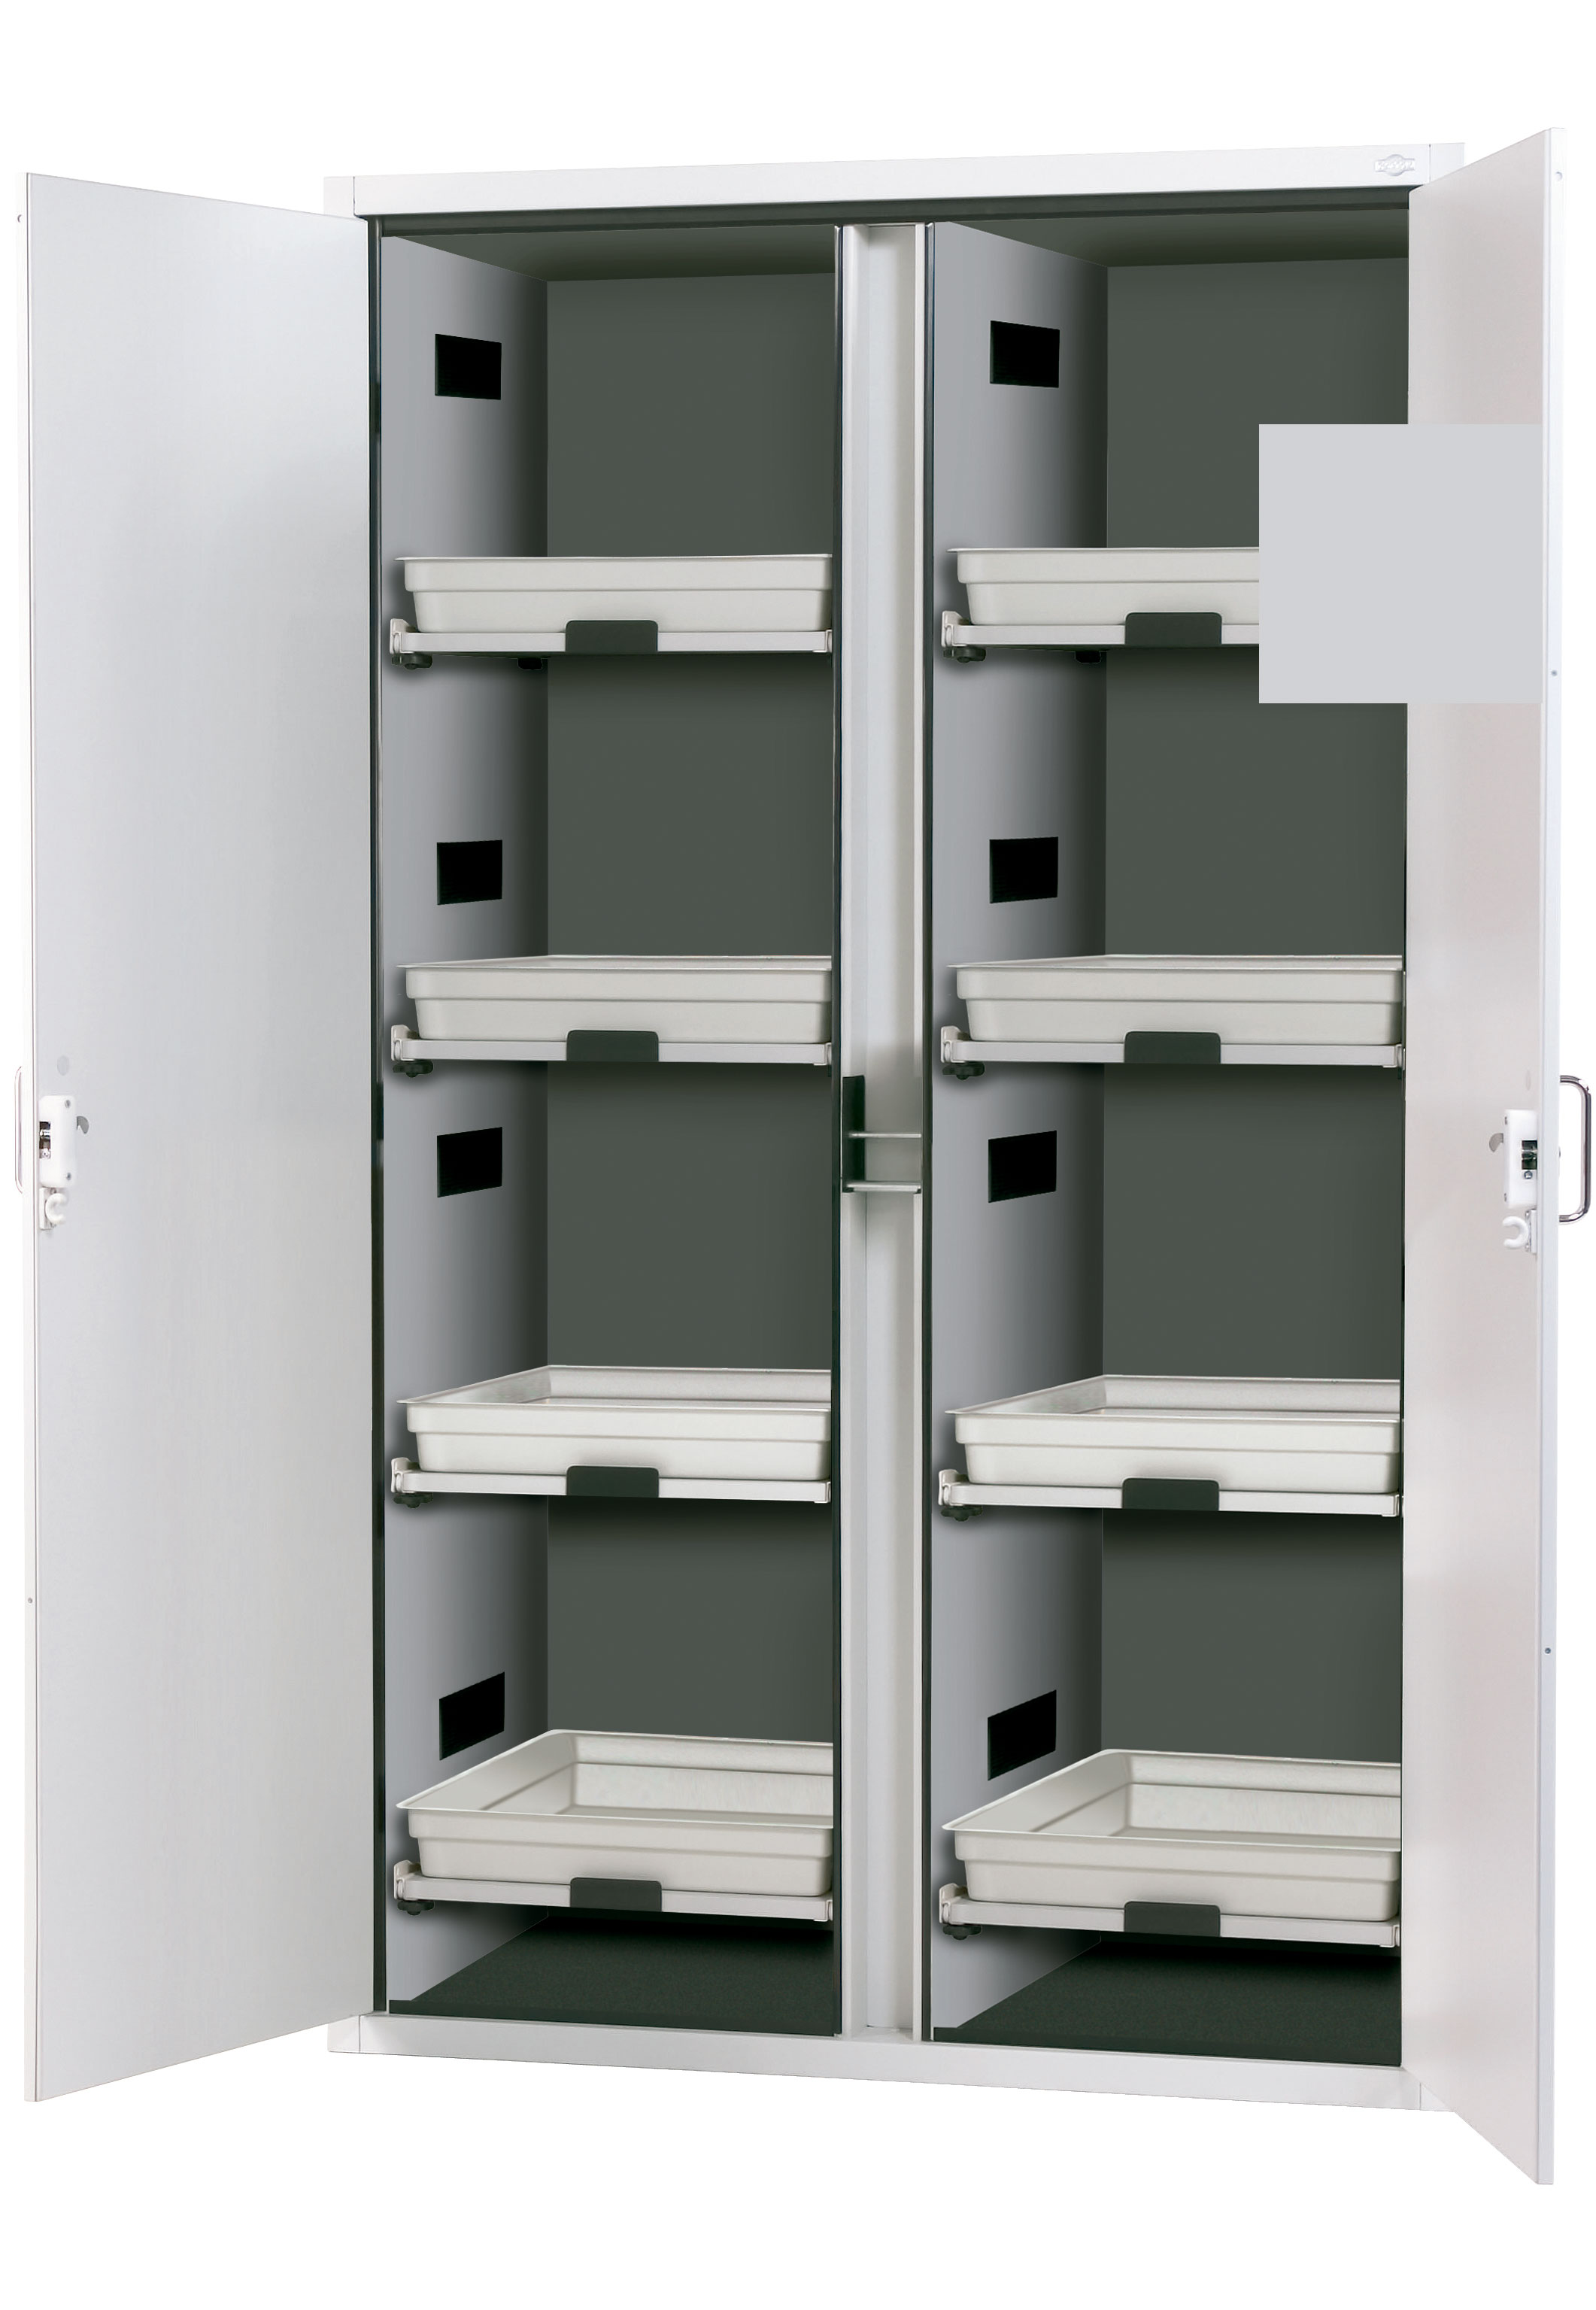 Cabinets for storage of corrosive products (acids and bases)